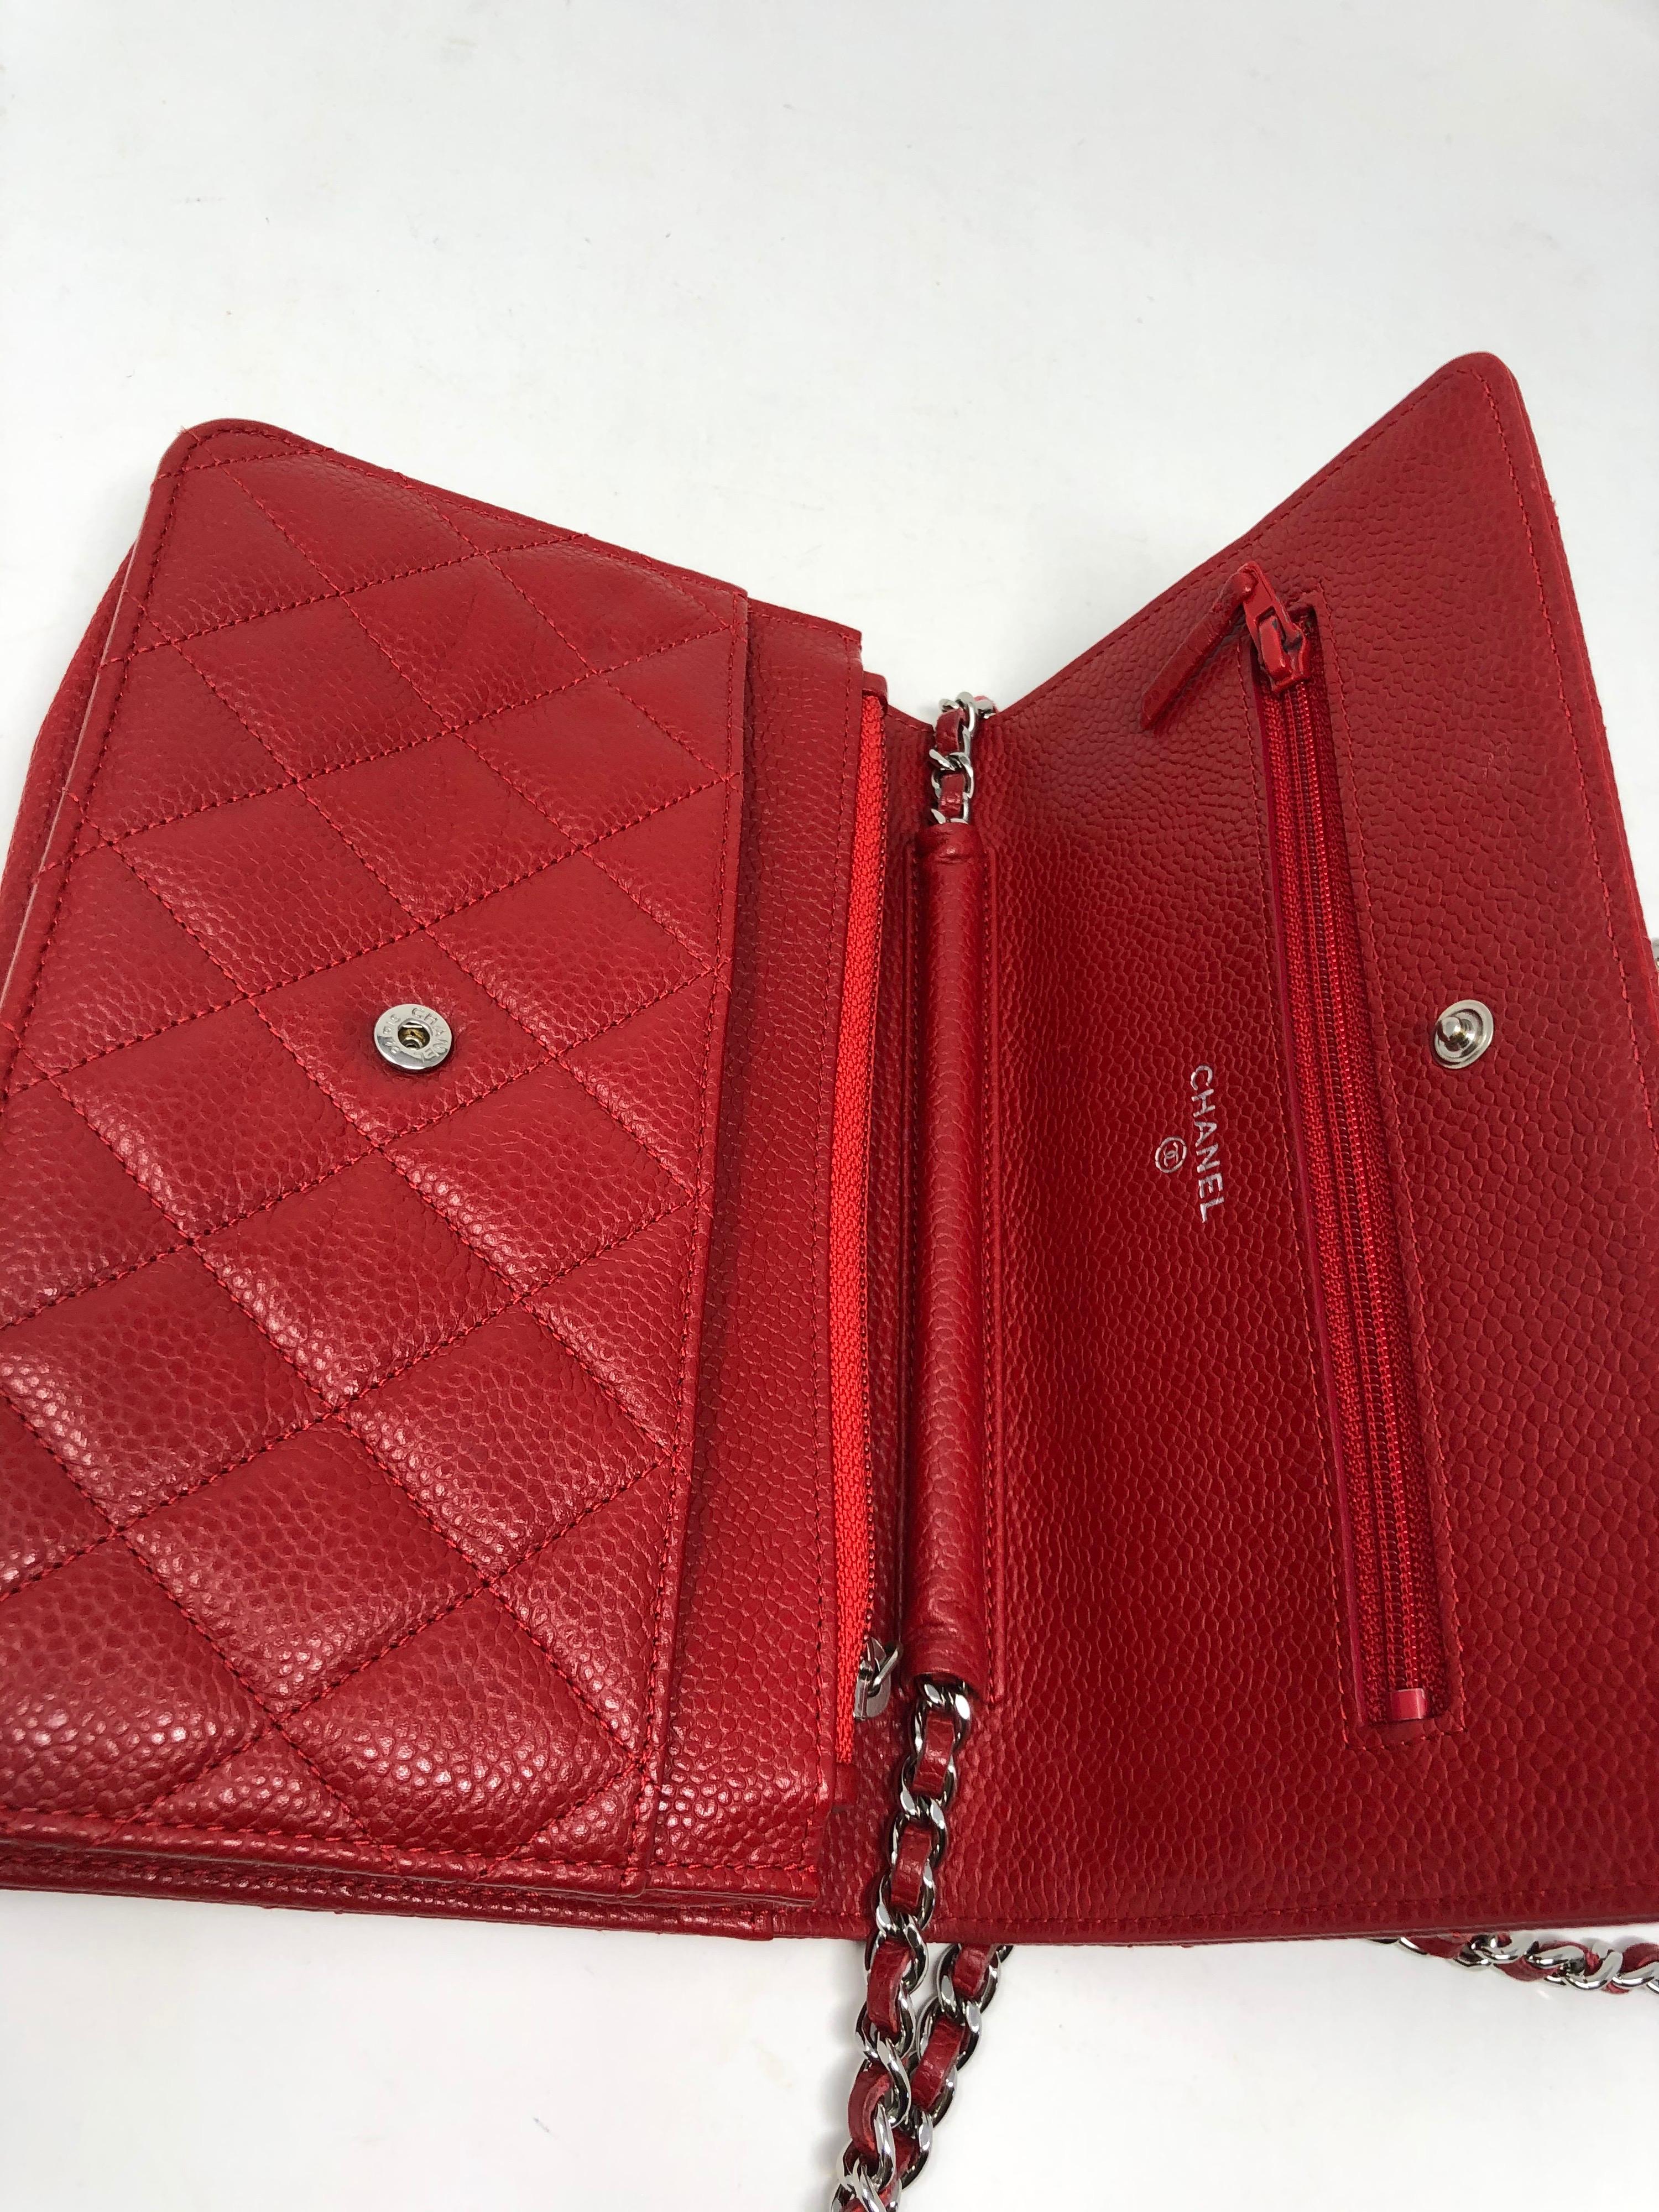 Chanel Red Caviar Wallet On A Chain Bag 4